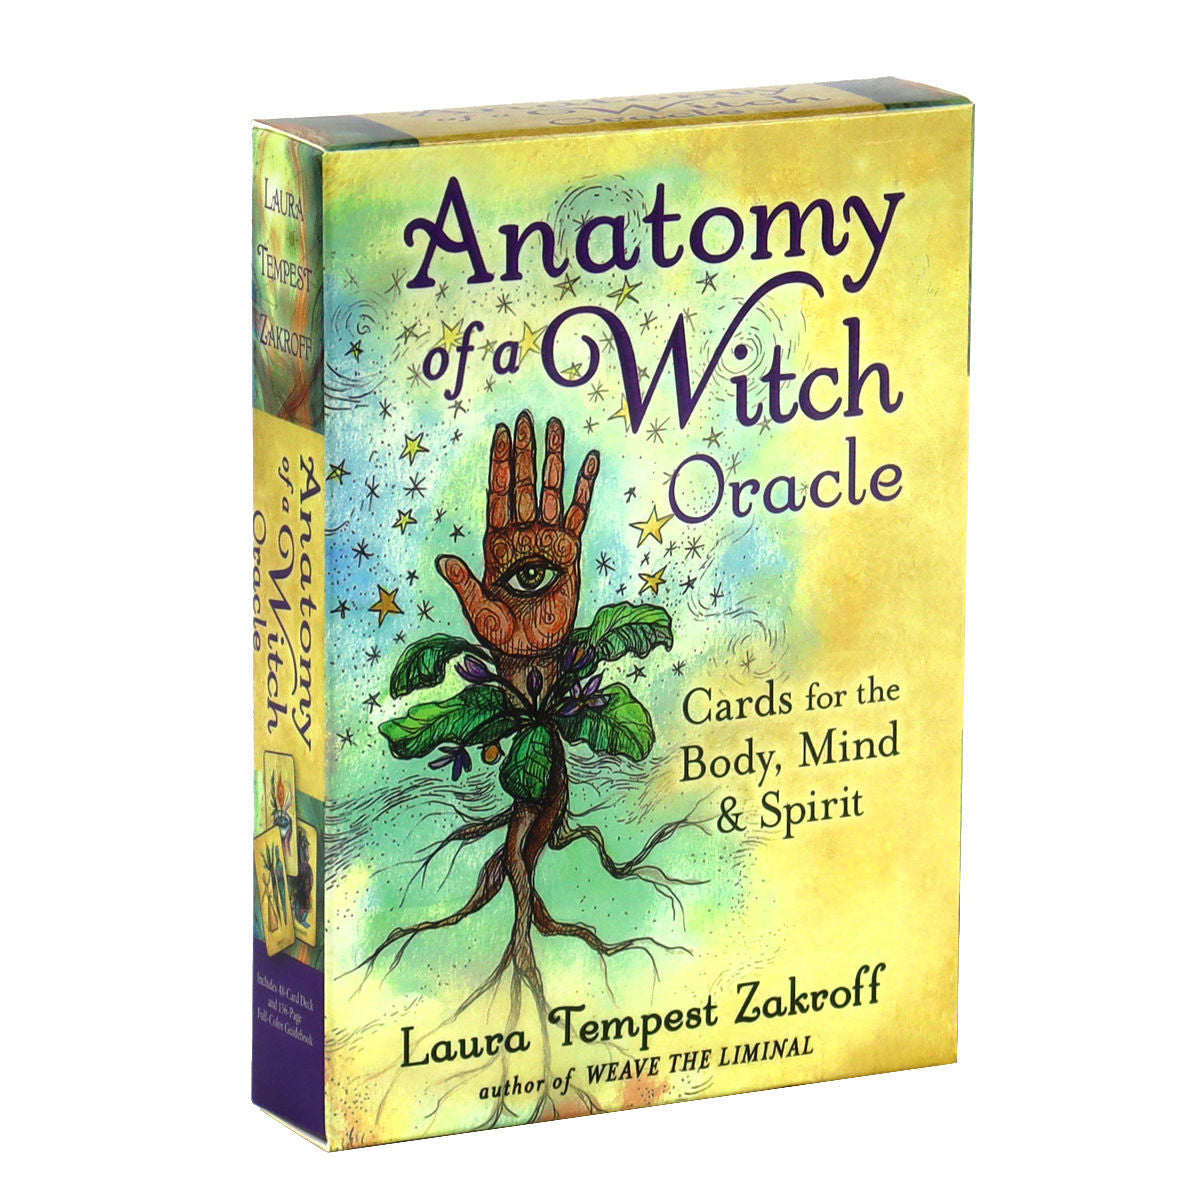 Anatomy of a Witch Oracle Cards for Beginners